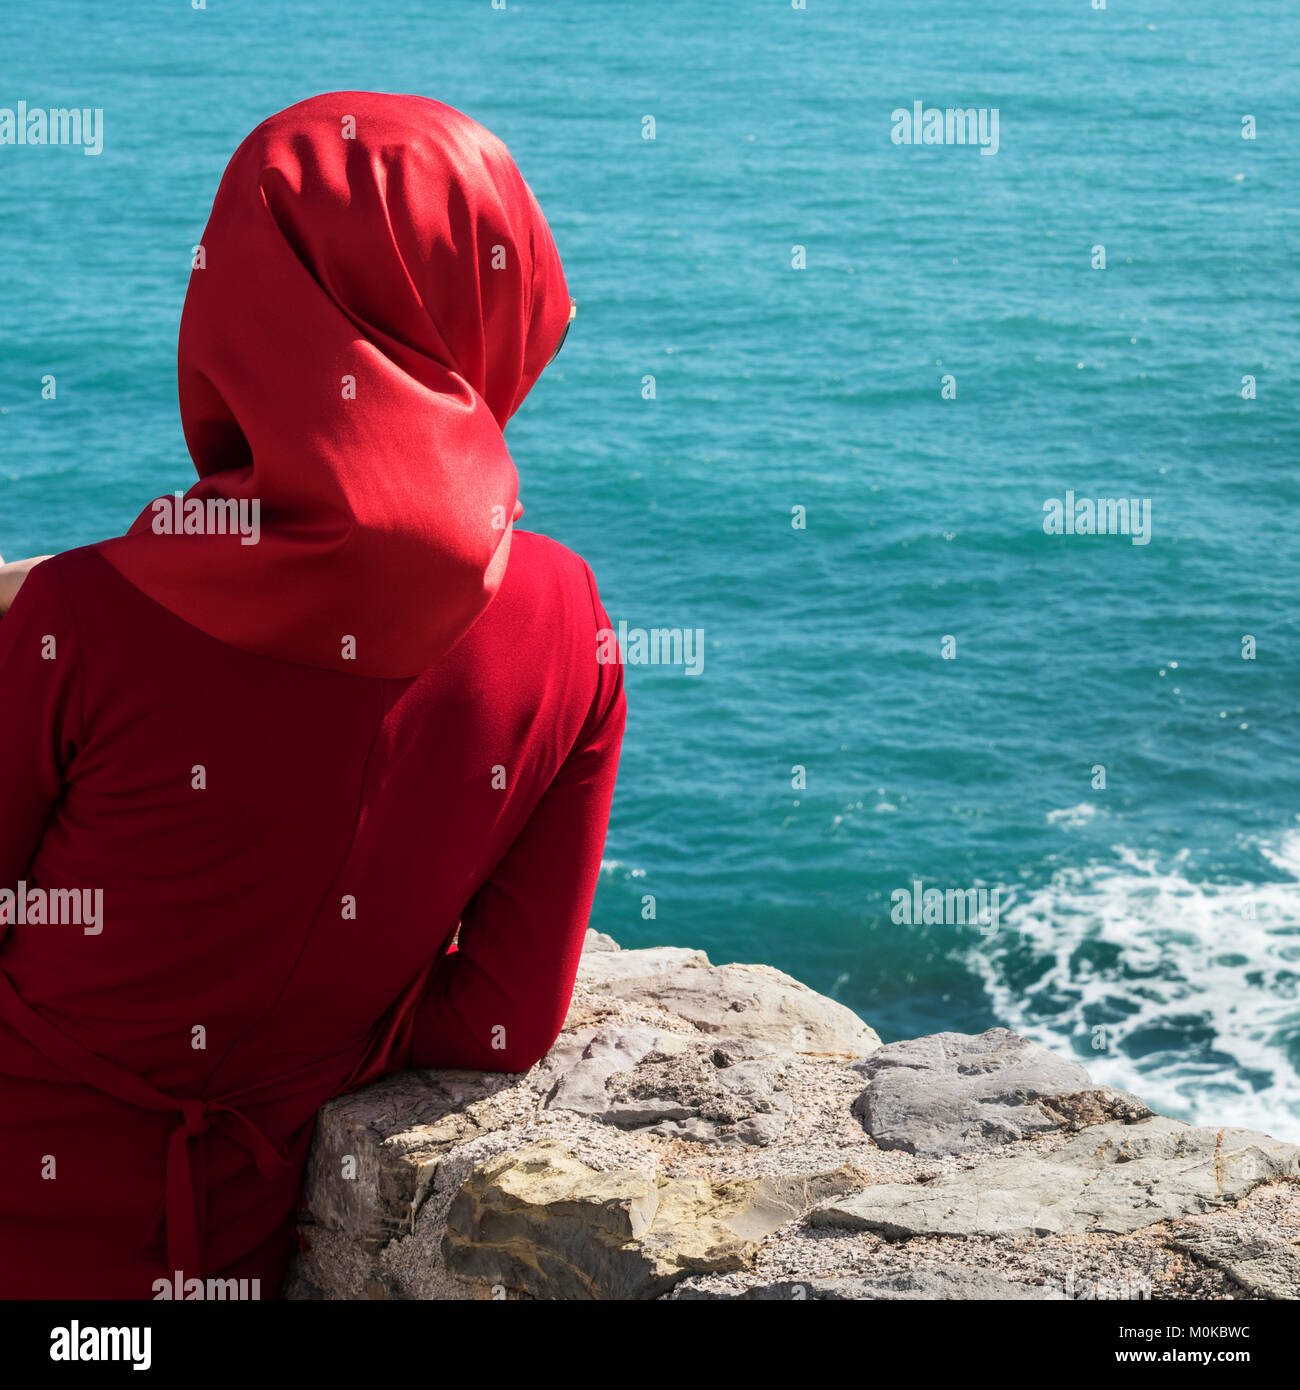 A woman wearing a red headscarf and red dress stands at a stone wall looking out at the blue water; Budva, Budva Municipality, Montenegro Stock Photo